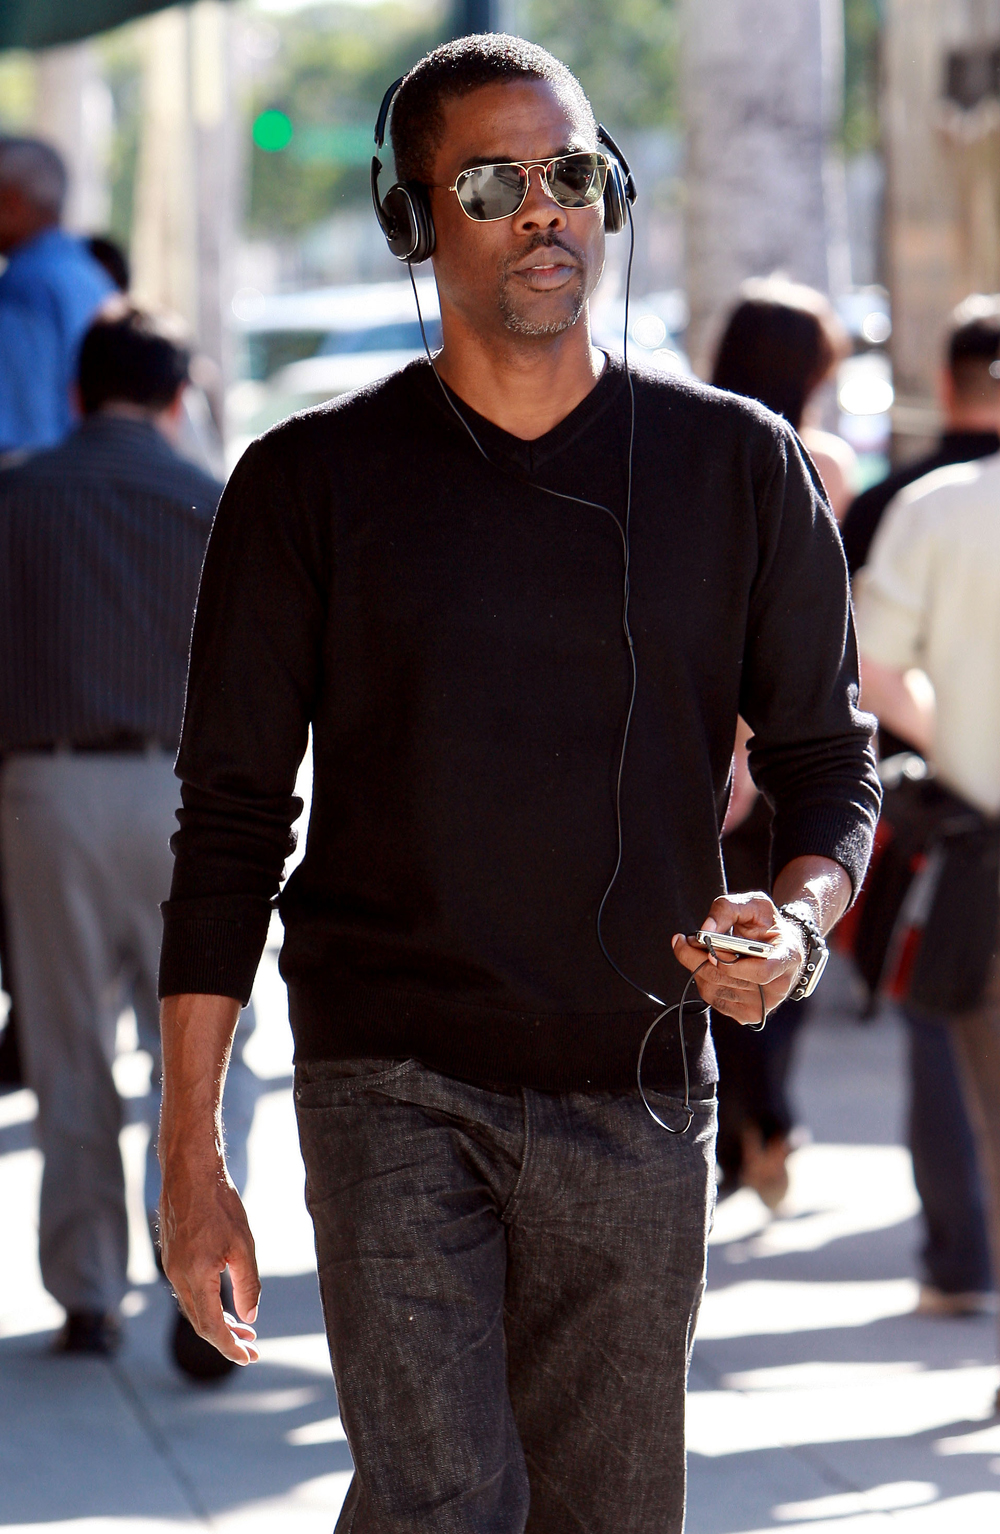 Chris Rock walking in Beverly Hills rehearsing with an iPod